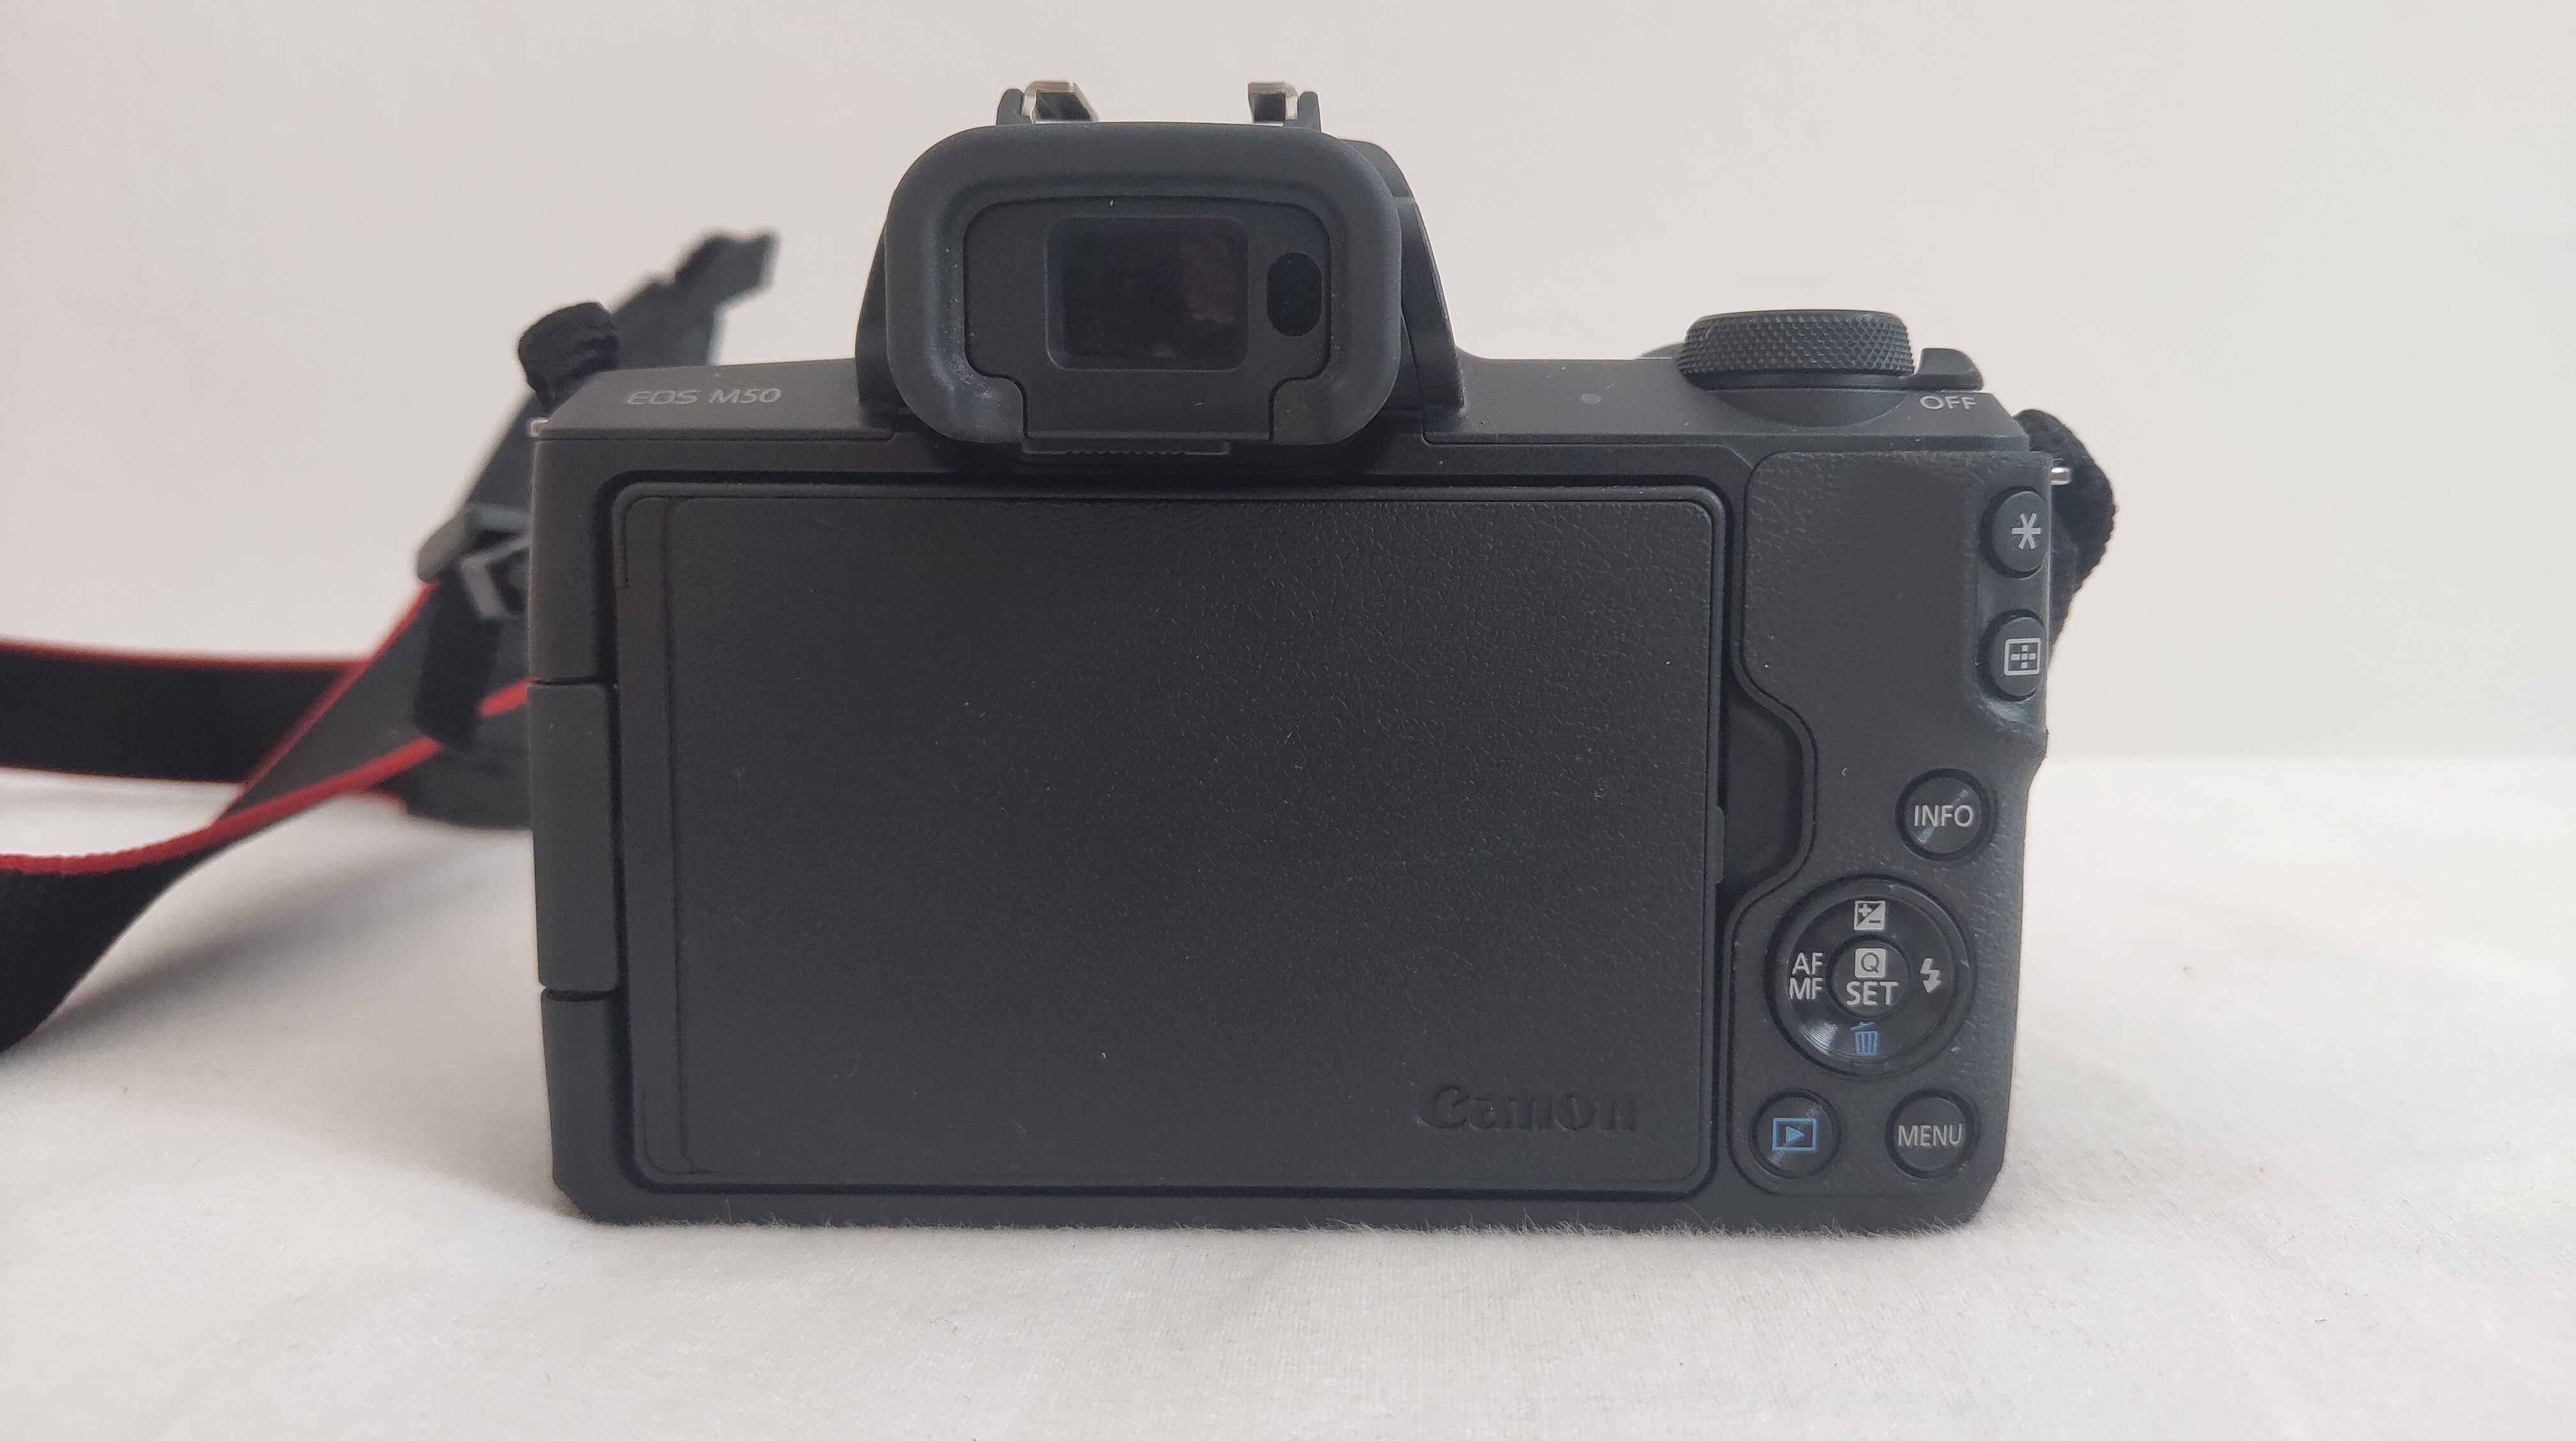 Фотоаппарат Canon EOS M50 + 15-45 IS STM Kit Black камера